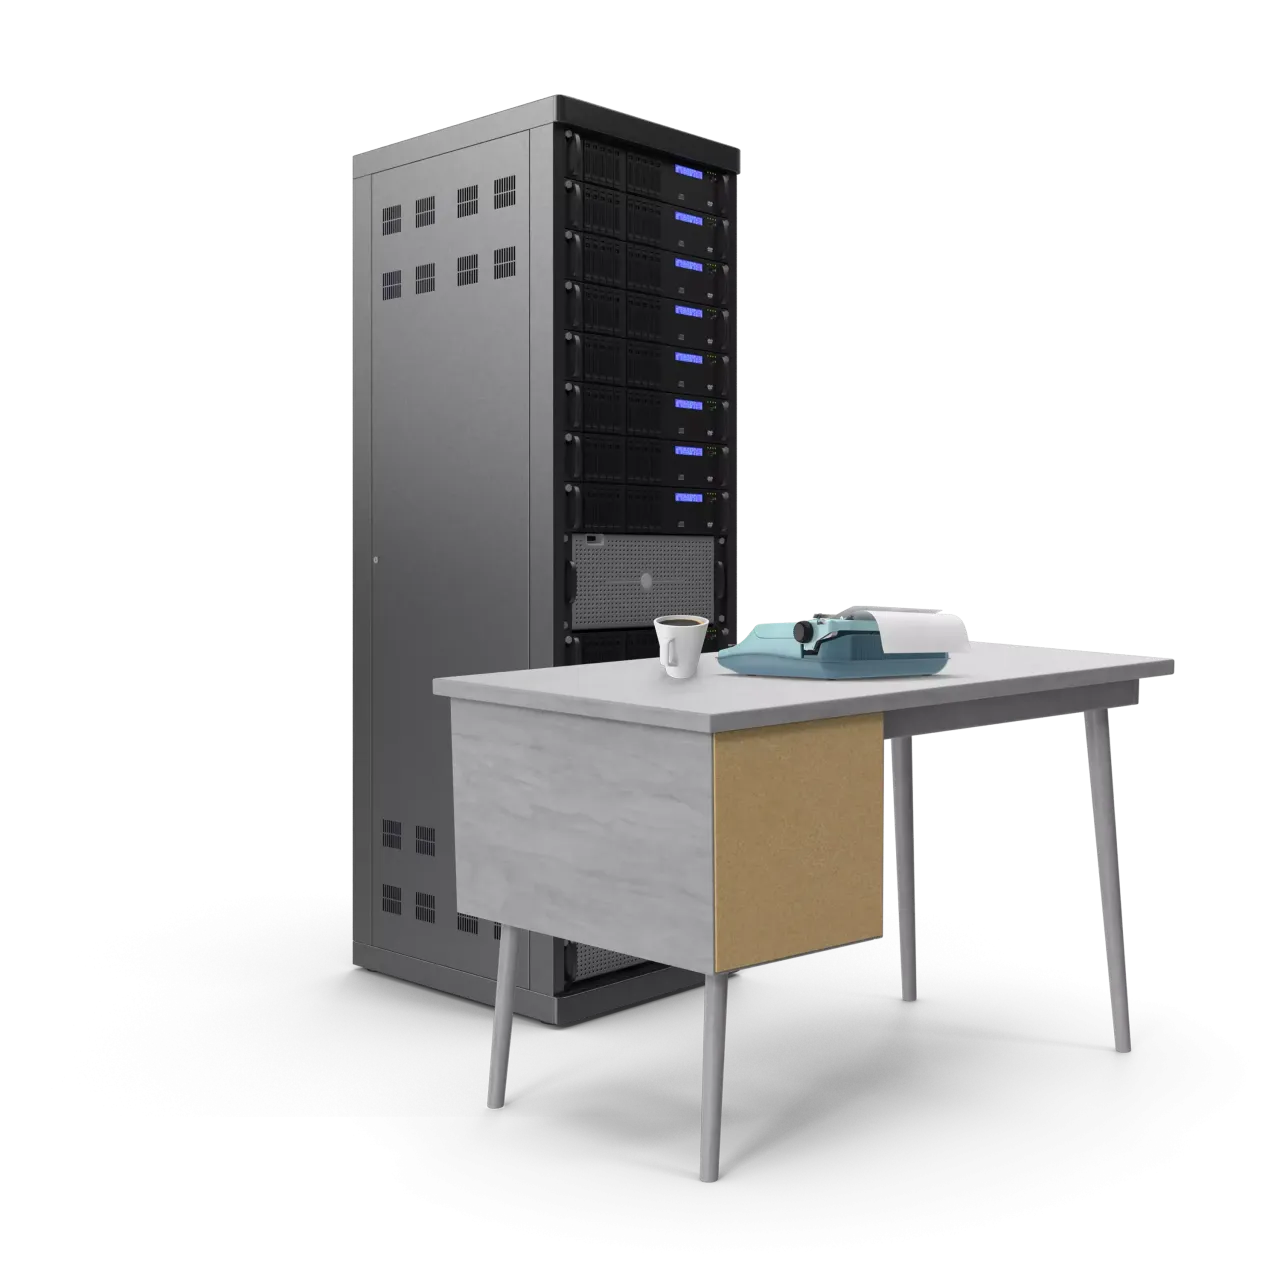 A data center behind a desk as the GPT quickcard header image